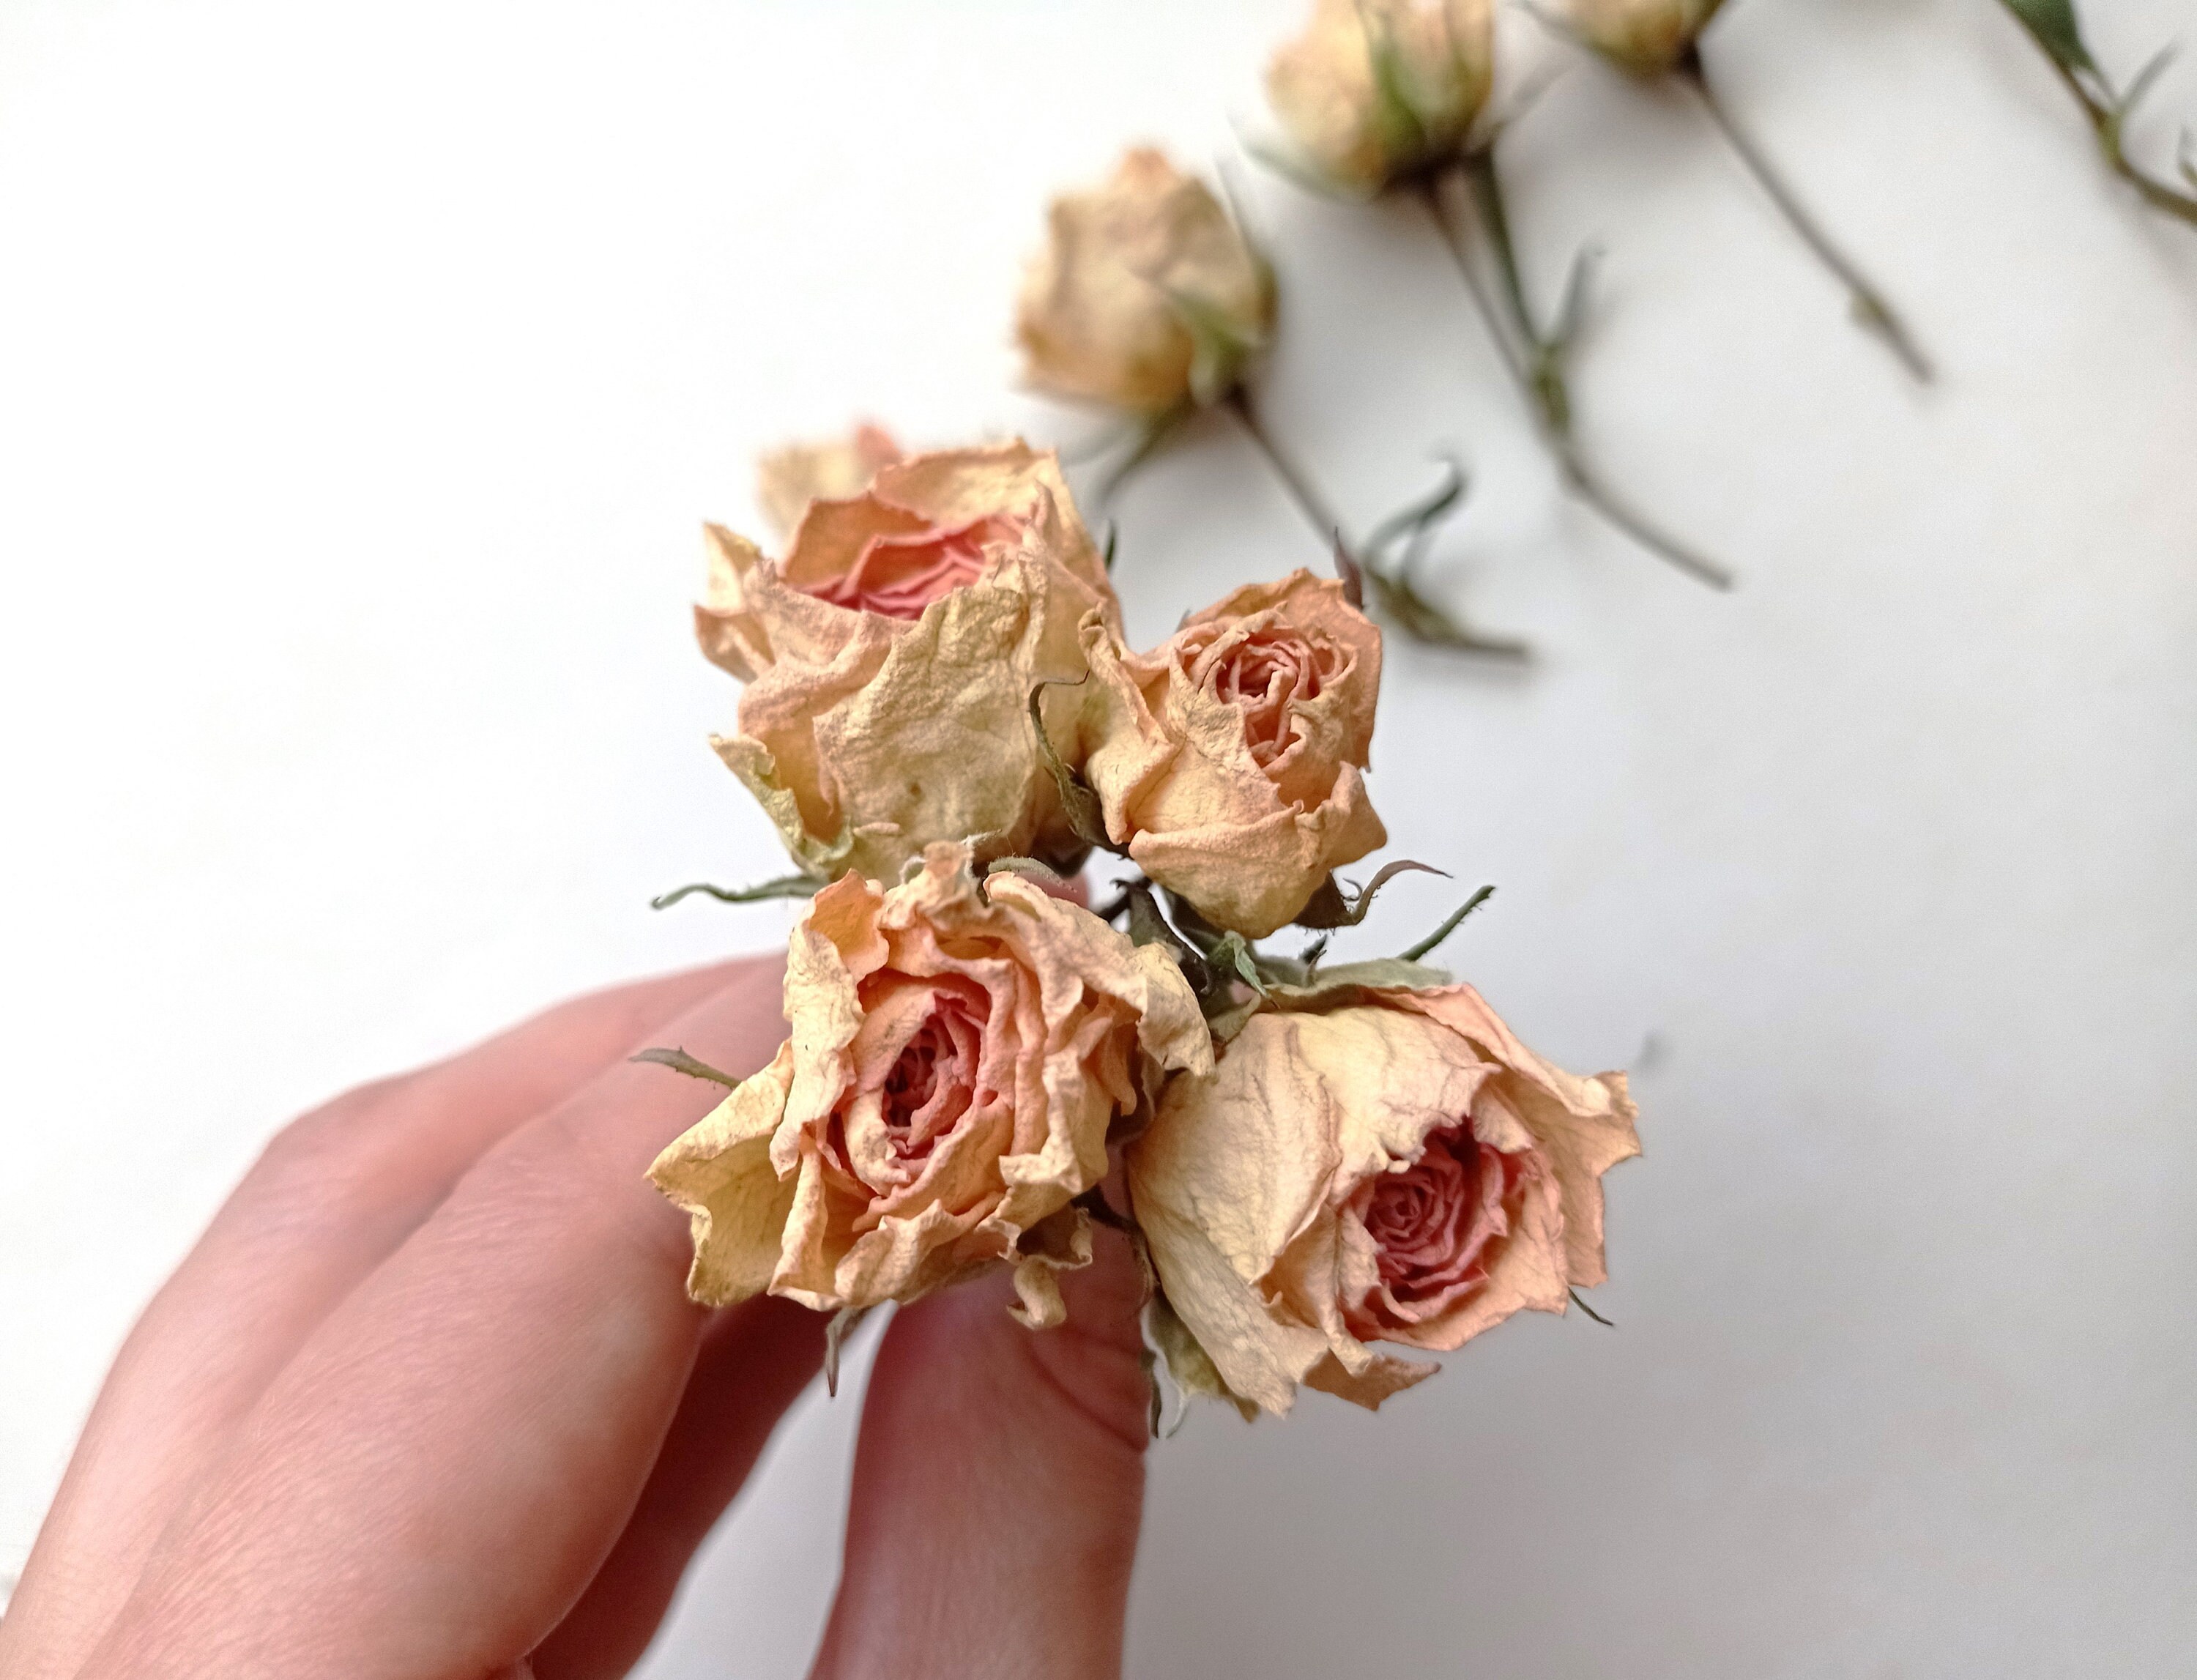 5pcs Dried Mini Roses, Dried Orange Roses, Tiny Dried Yellow Roses for  Crafts -  Israel